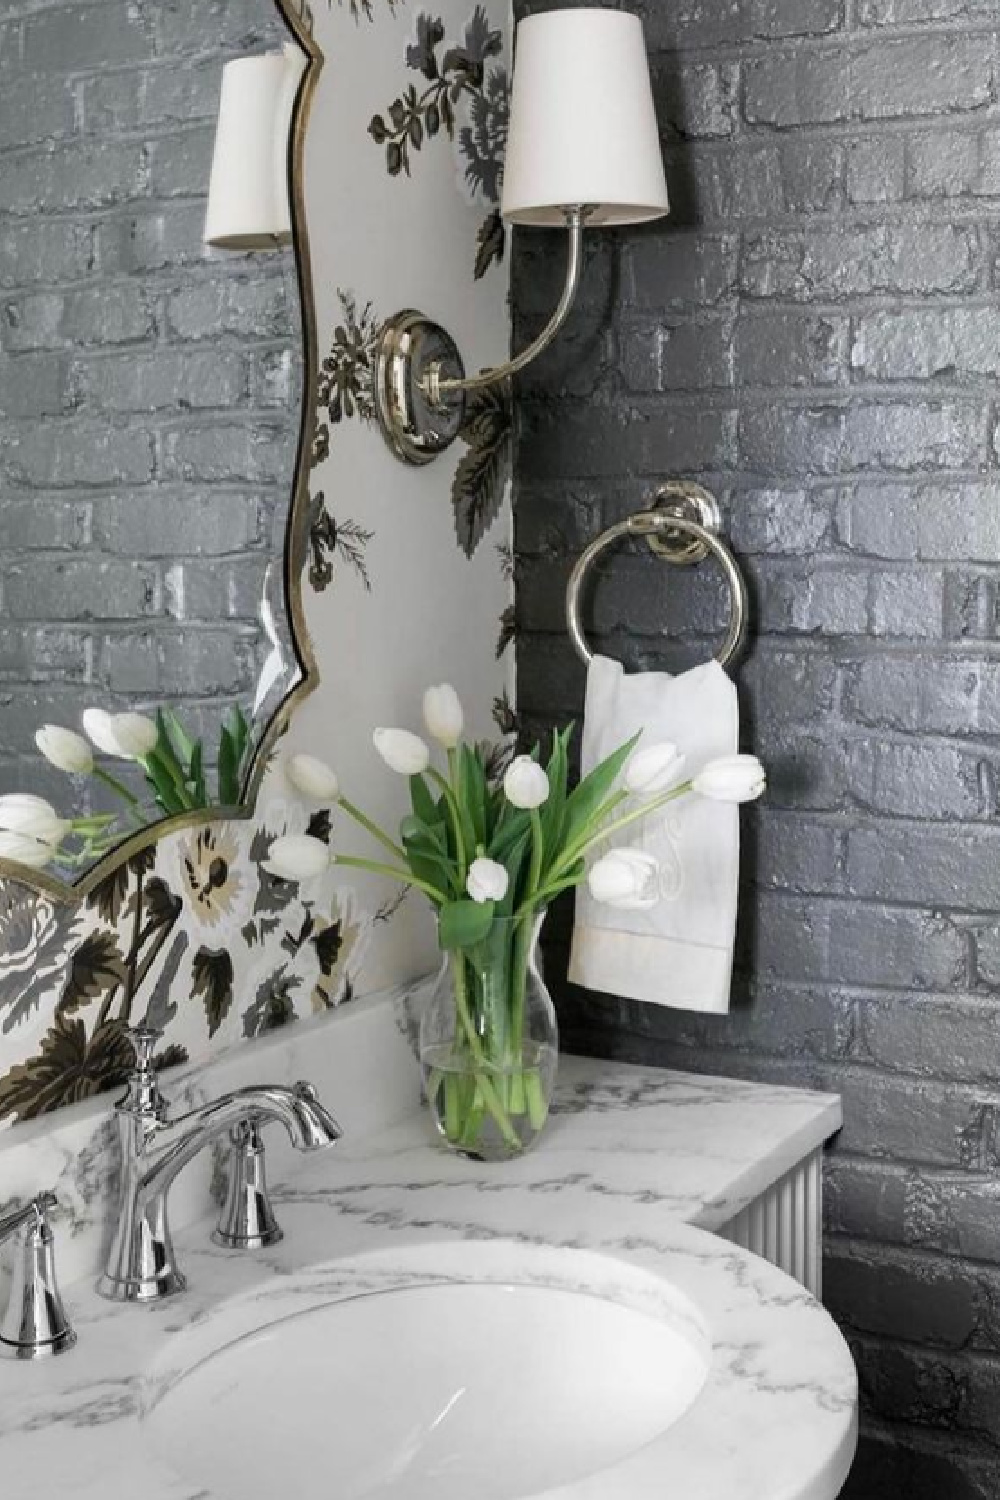 Urbane Bronze (Sherwin-Williams) charcoal or soft black paint color on brick in bathroom - design by Sherry Hart. #urbanebronze #charcoalpaintcolors #sherwinwilliamsurbanebronze